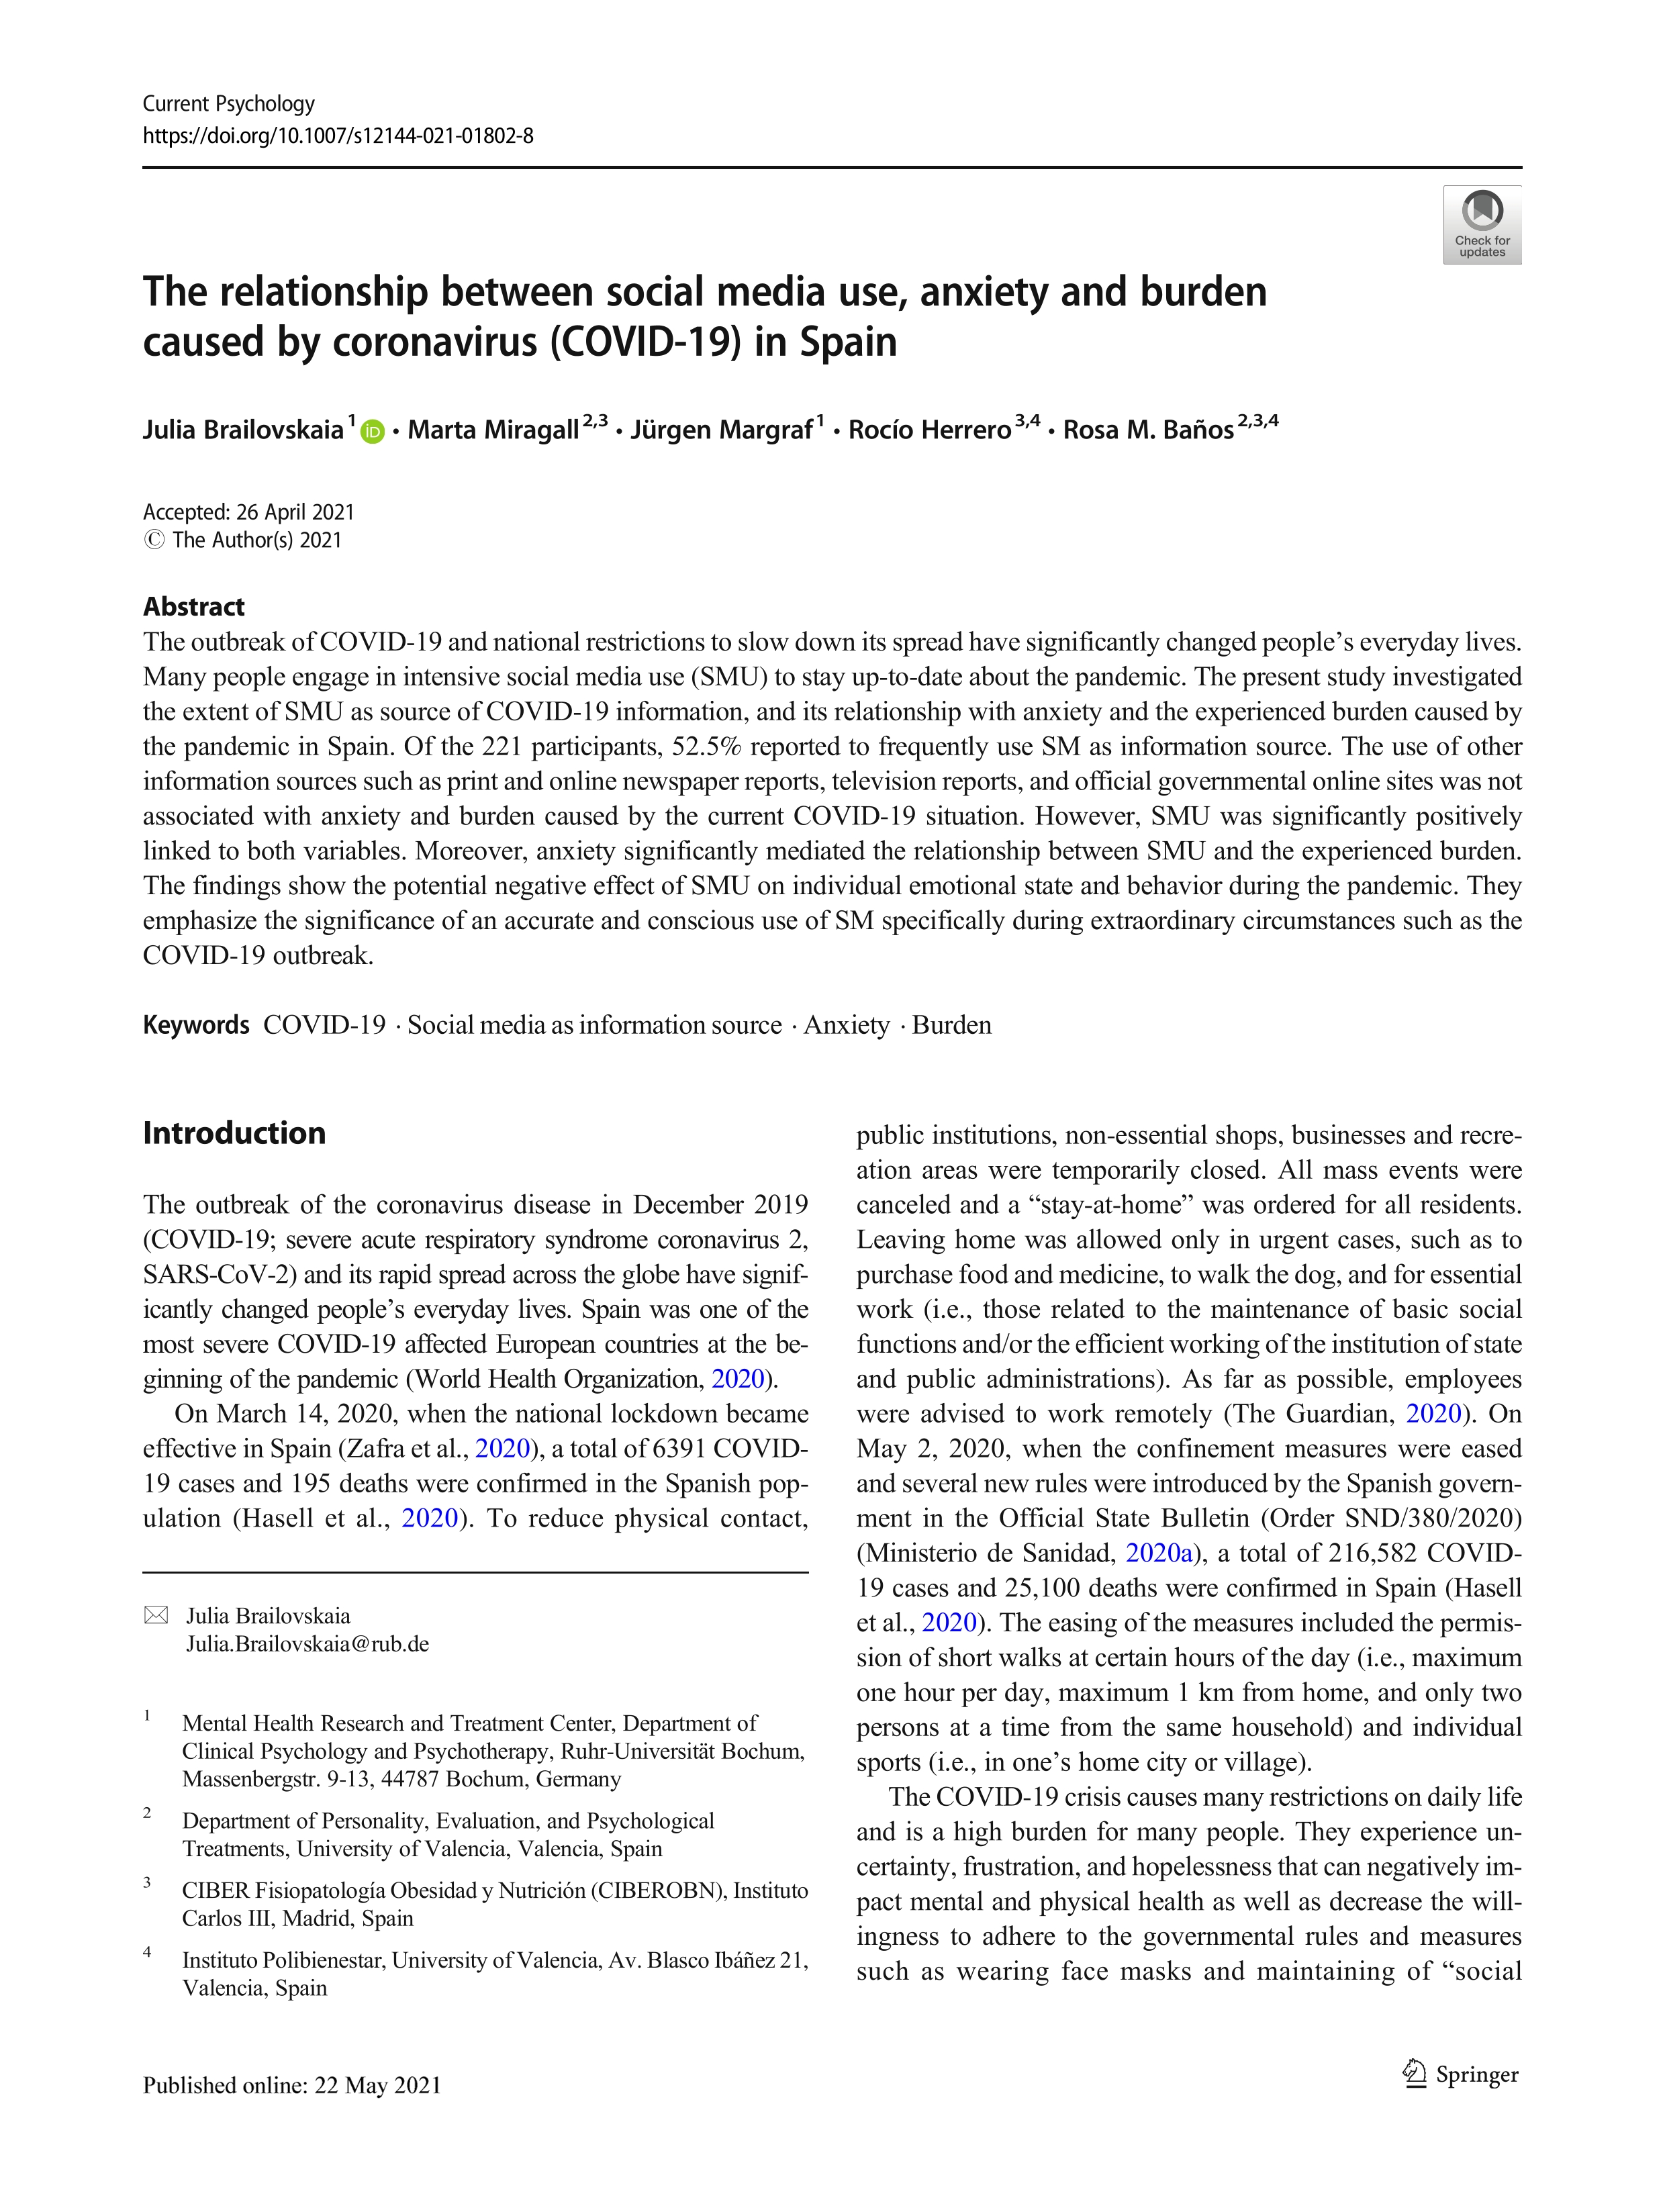 The relationship between social media use, anxiety and burden caused by coronavirus (COVID-19) in Spain